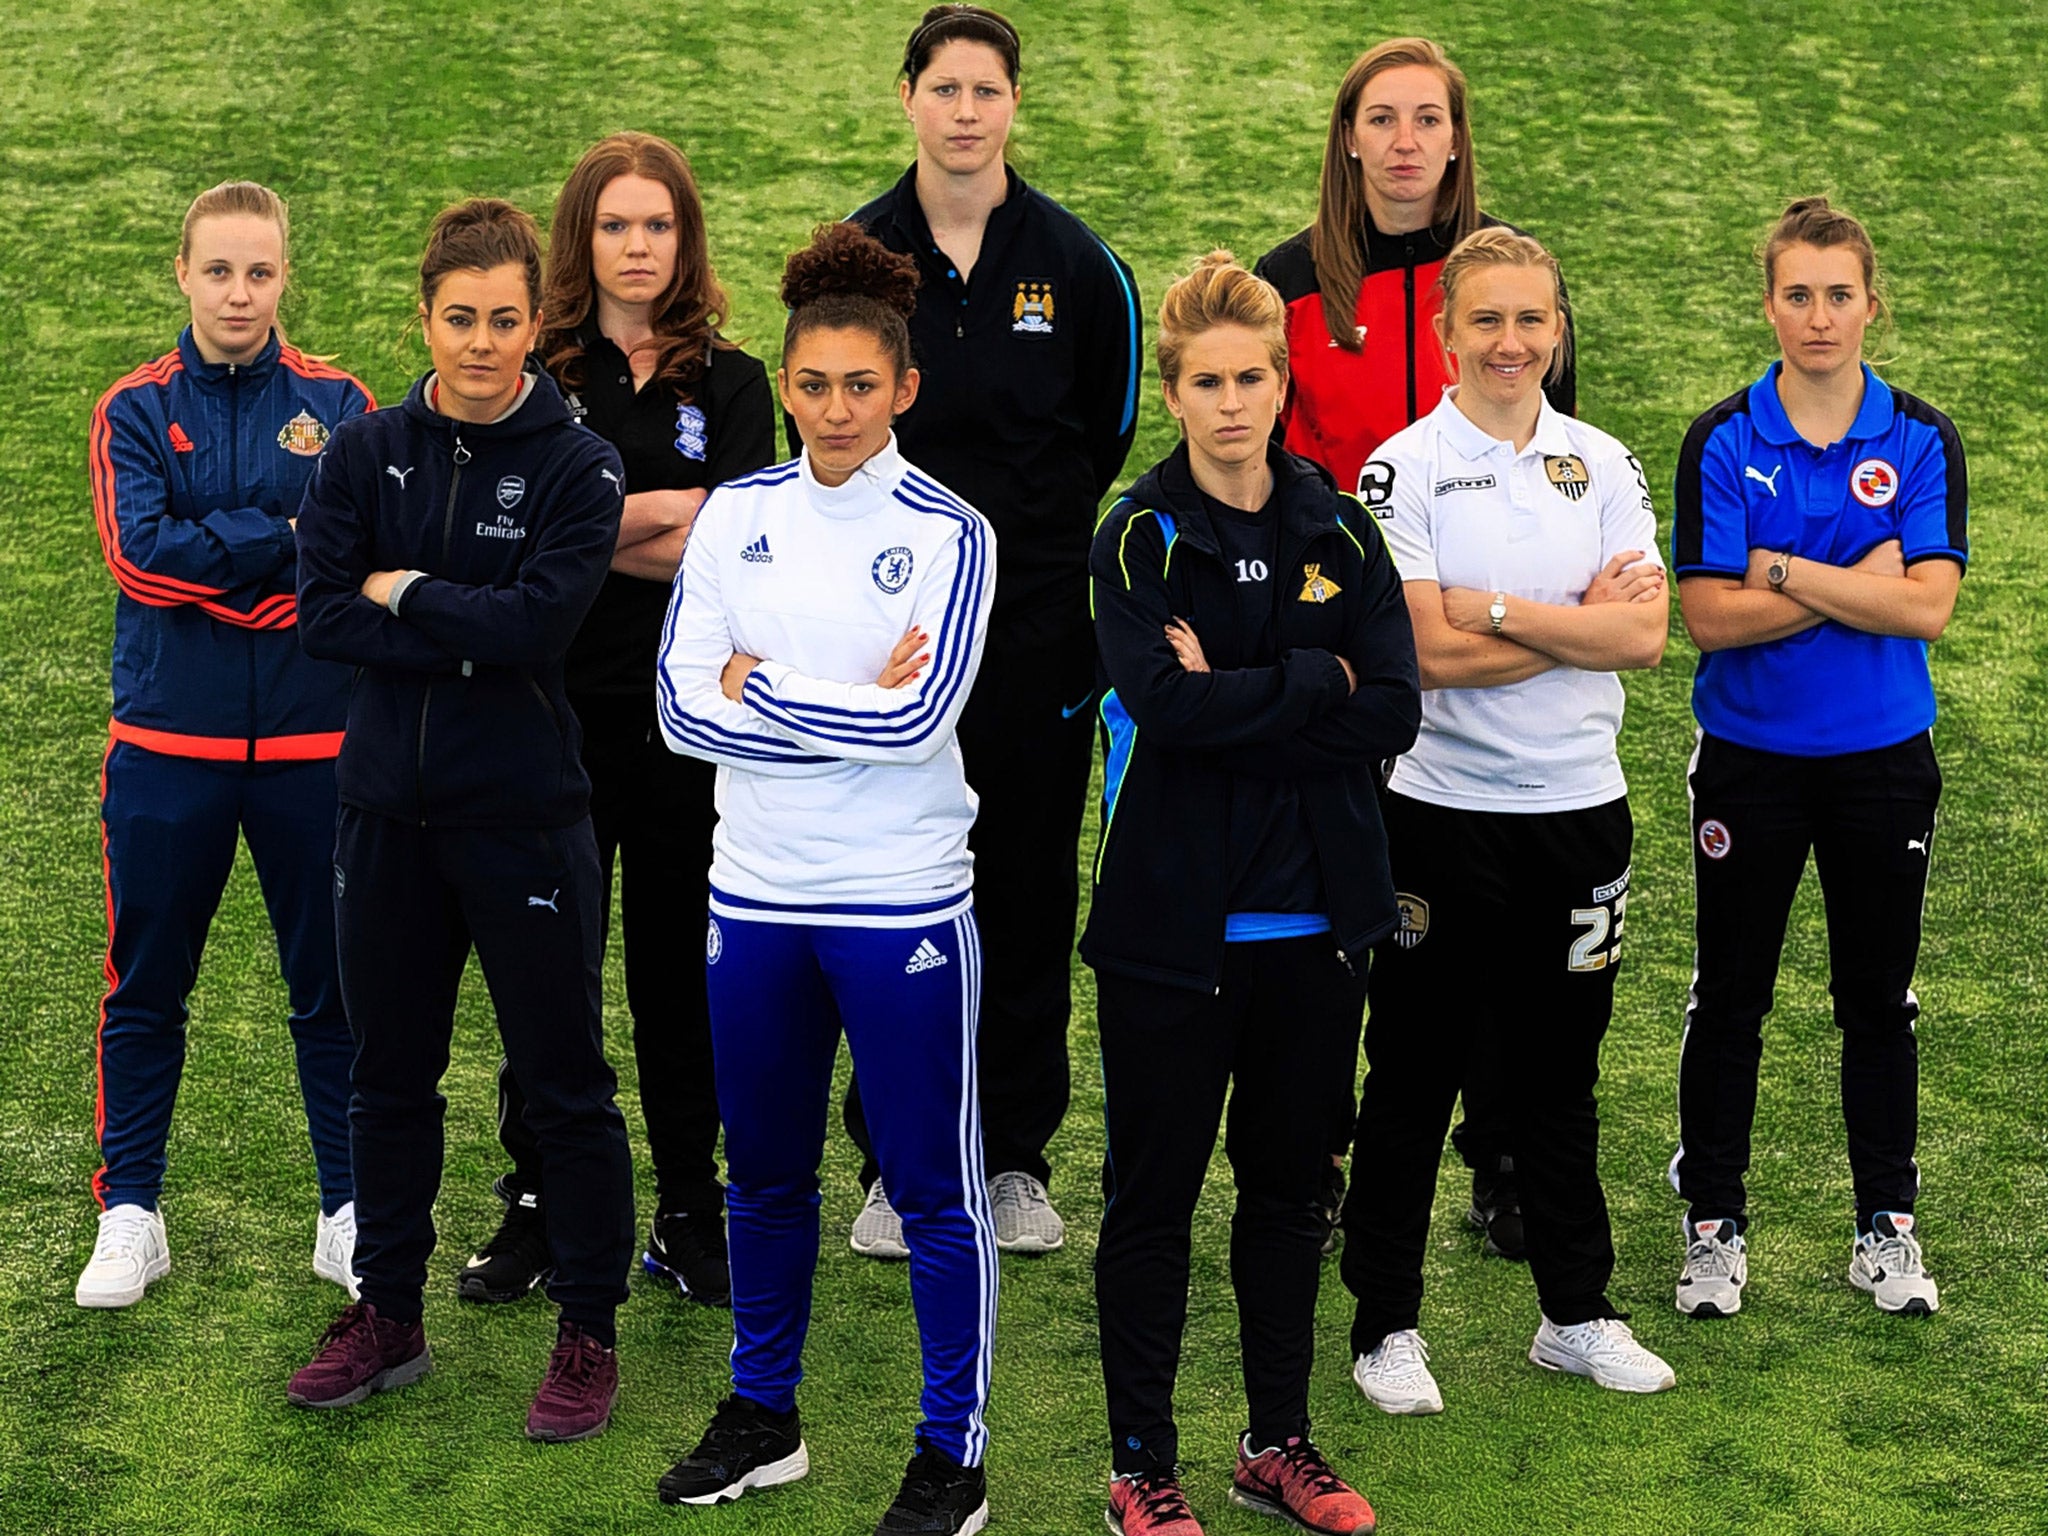 Beth Mead (Sunderland), Jemma Rose (Arsenal), Aoife Mannion (Birmingham City), Jade Bailey (Chelsea), Marie Hourihan (Manchester City), Natasha Dowie (Doncaster Rovers Belles), Siobhan Chamberlain (Liverpool), Laura Bassett (Notts County) and Amber Stobbs (Reading) at St George’s Park for the launch of the WSL